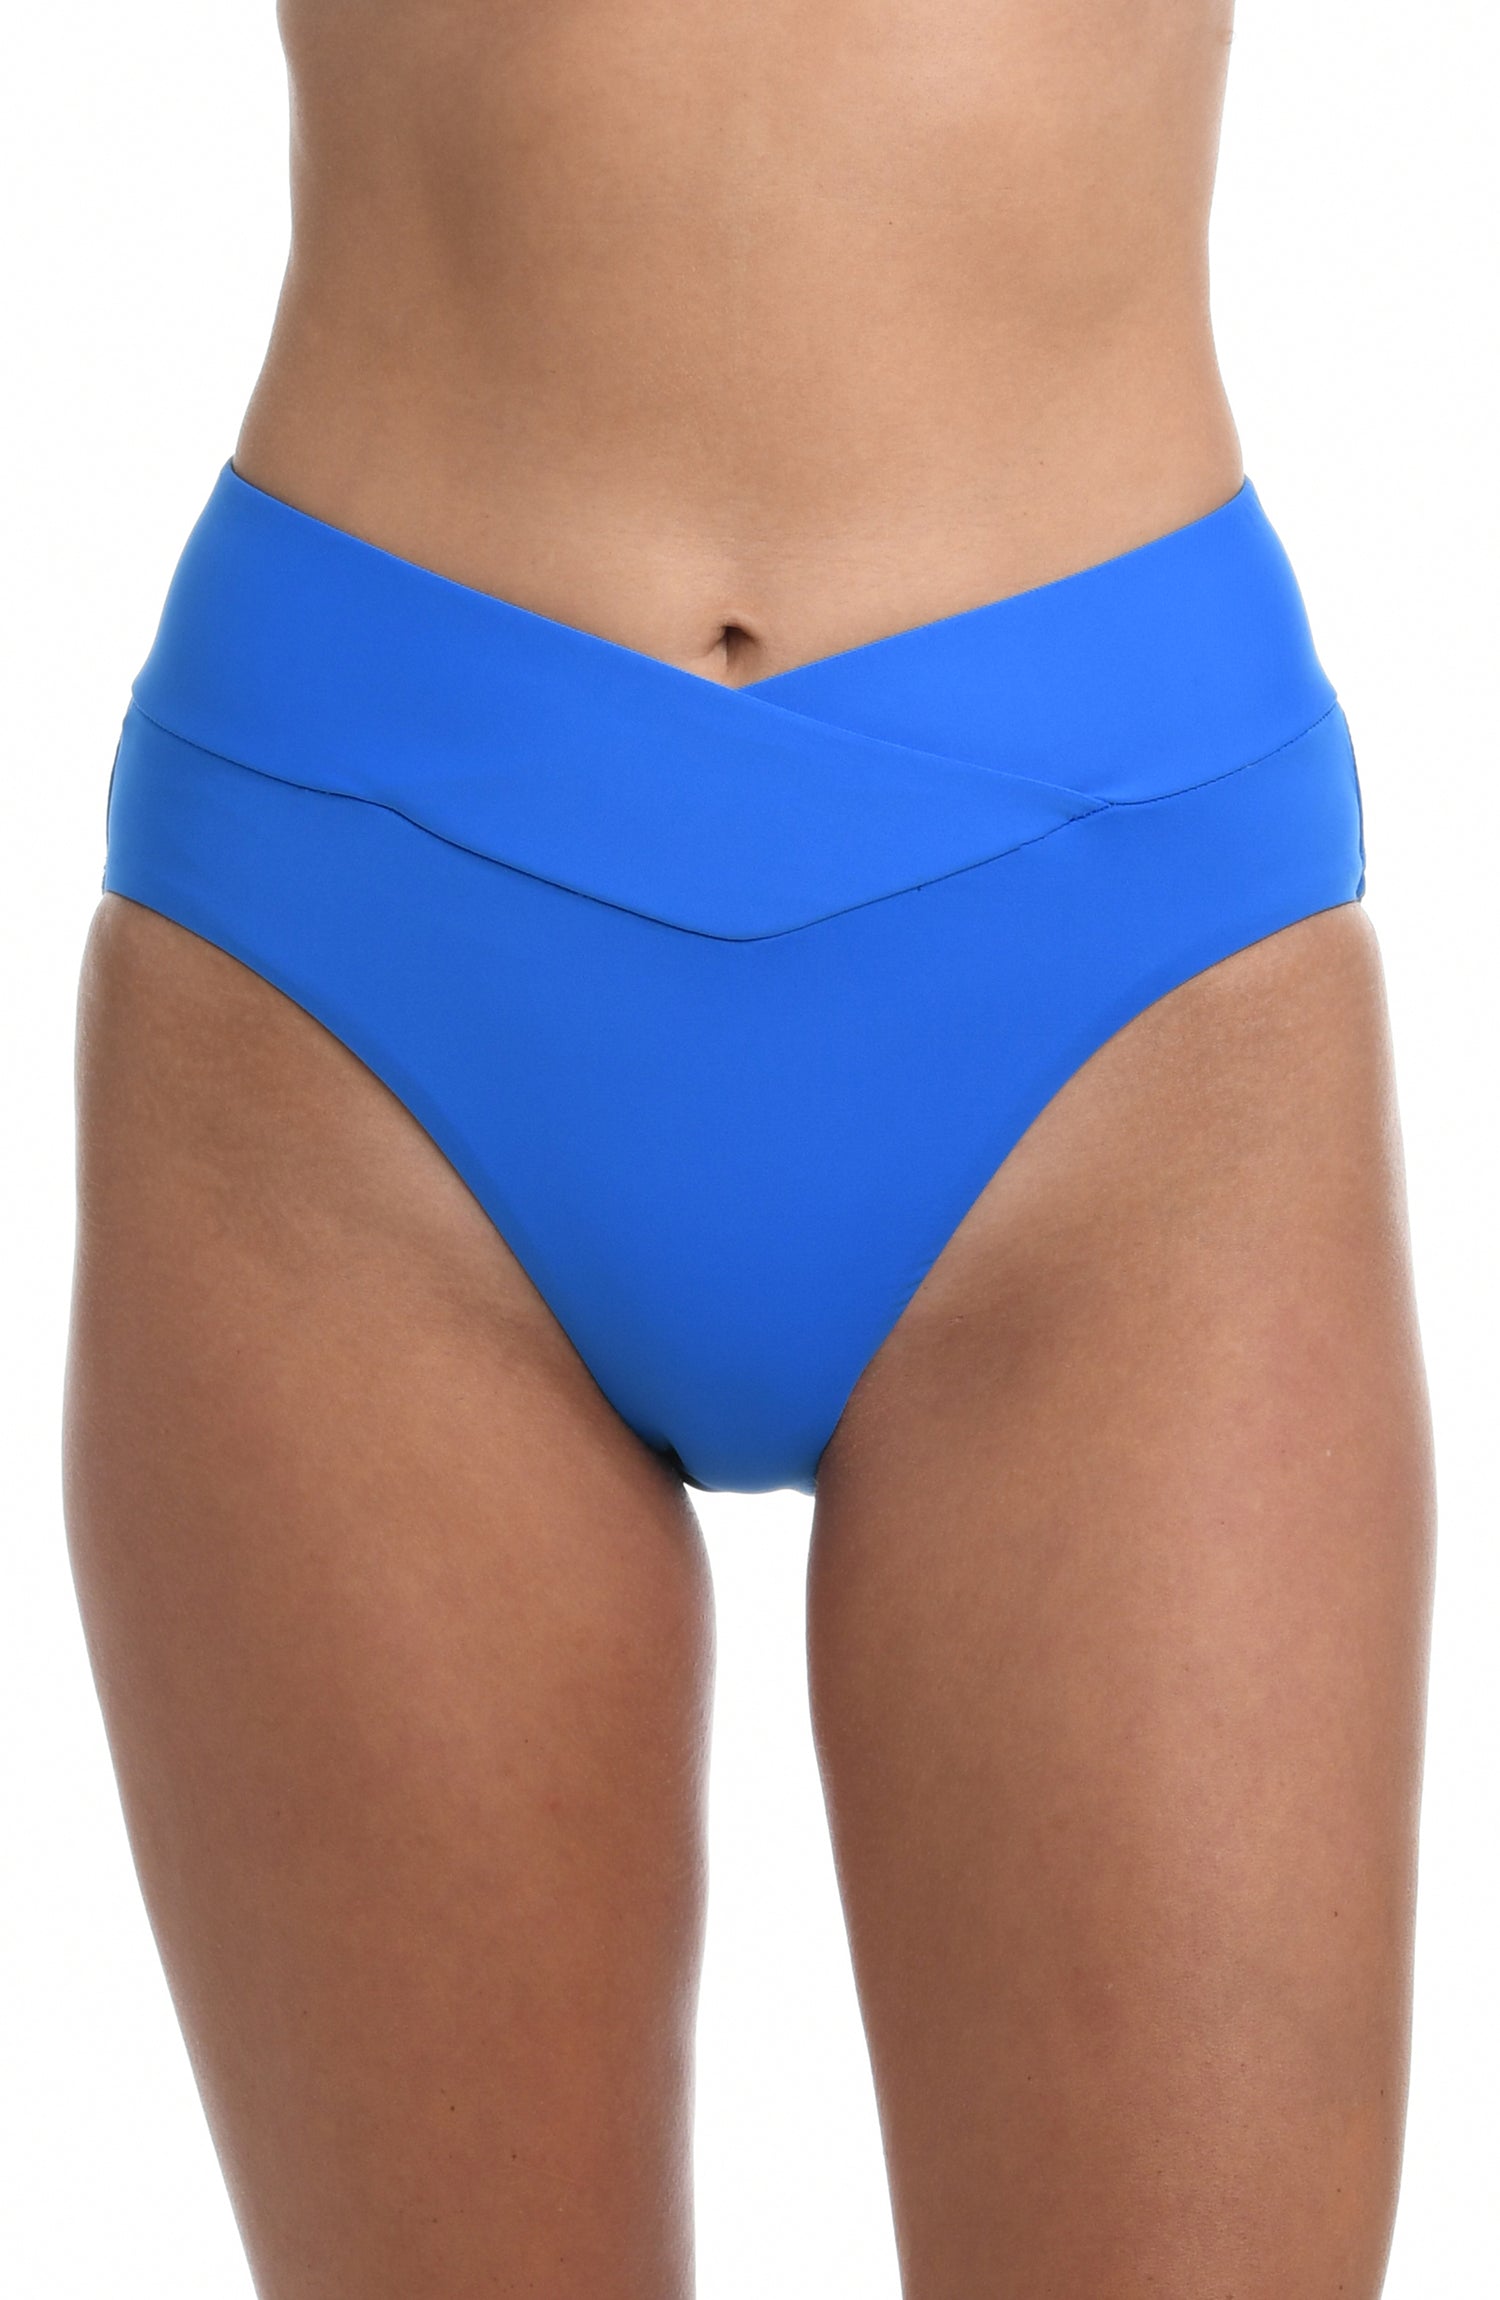 Model is wearing a capri blue colored high waist swimsuit bottom from our Best-Selling Island Goddess collection.